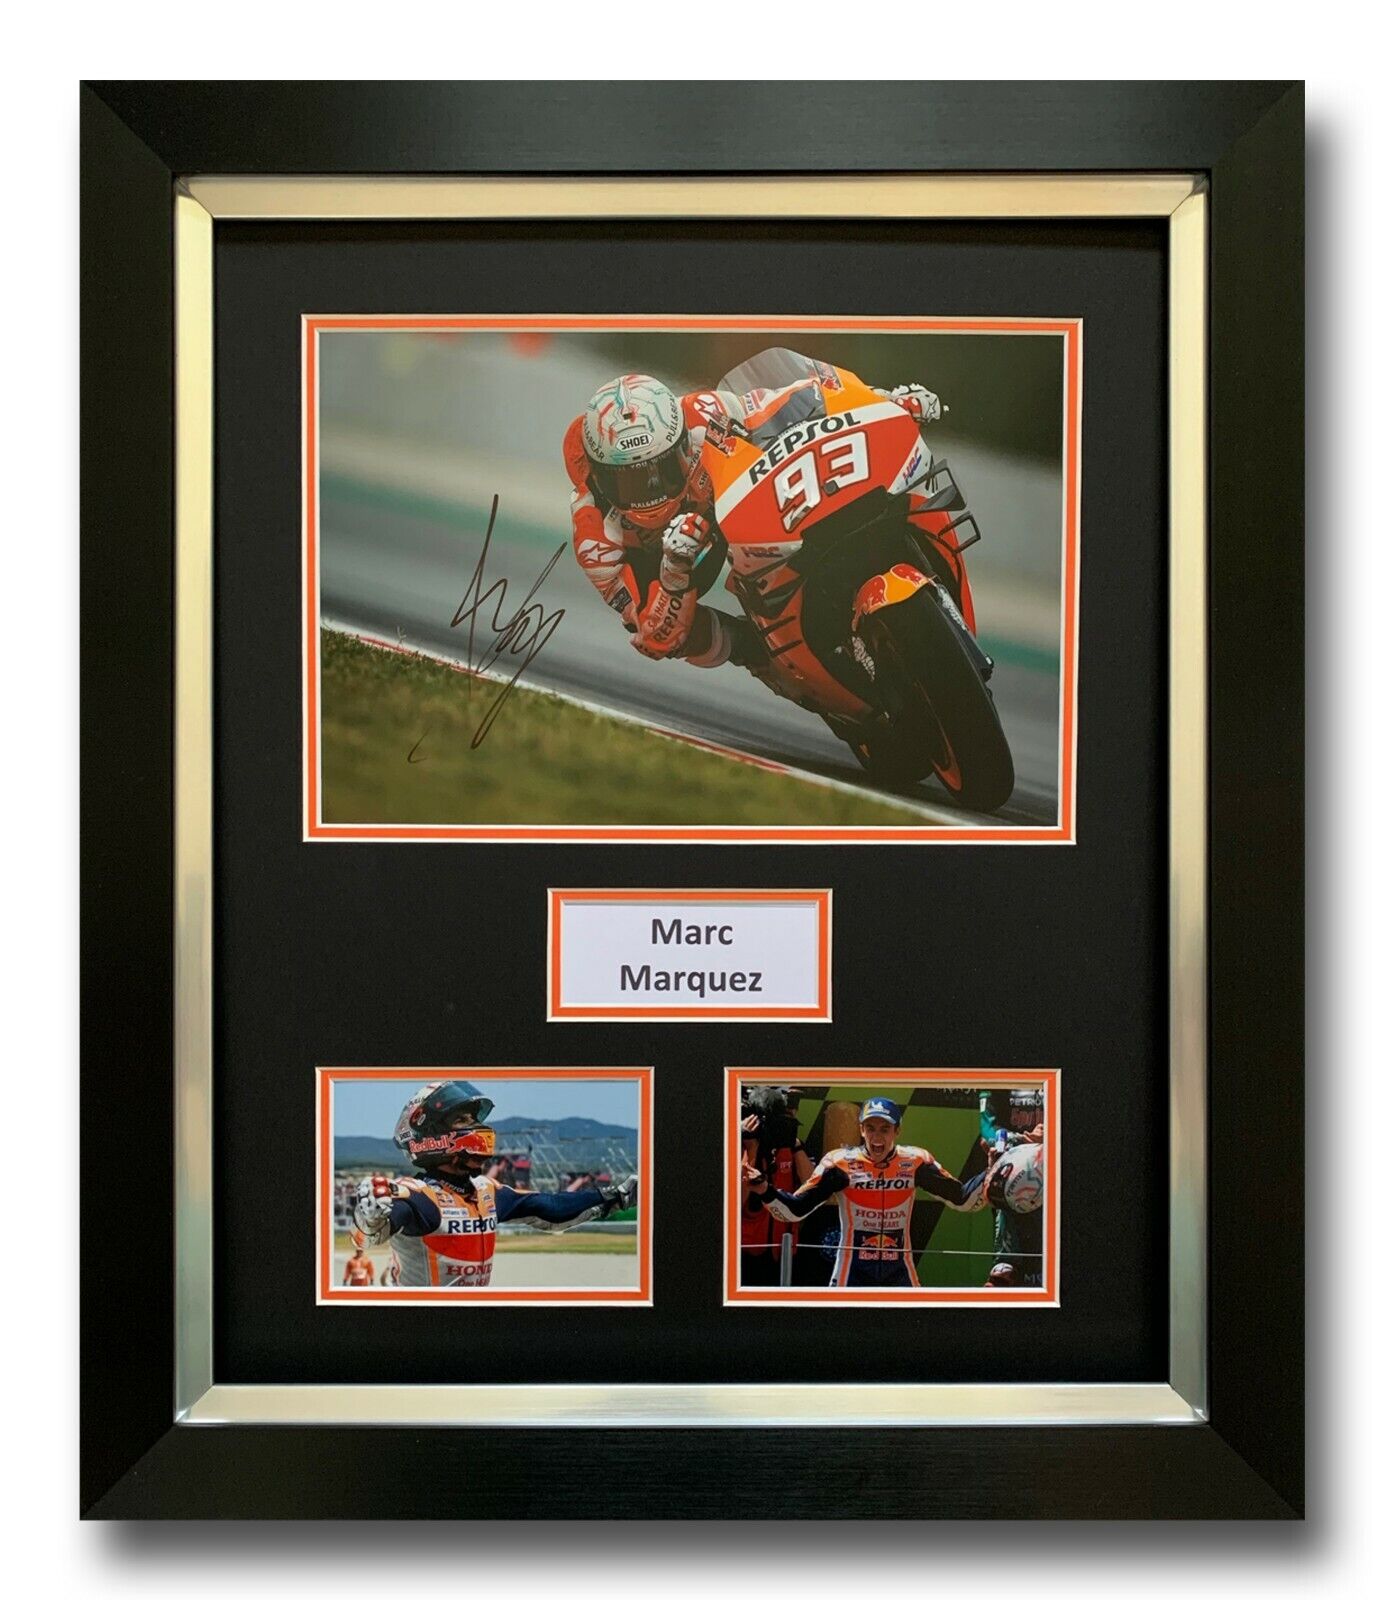 MARC MARQUEZ HAND SIGNED FRAMED Photo Poster painting DISPLAY - REPSOL HONDA - MOTOGP AUTOGRAPH.